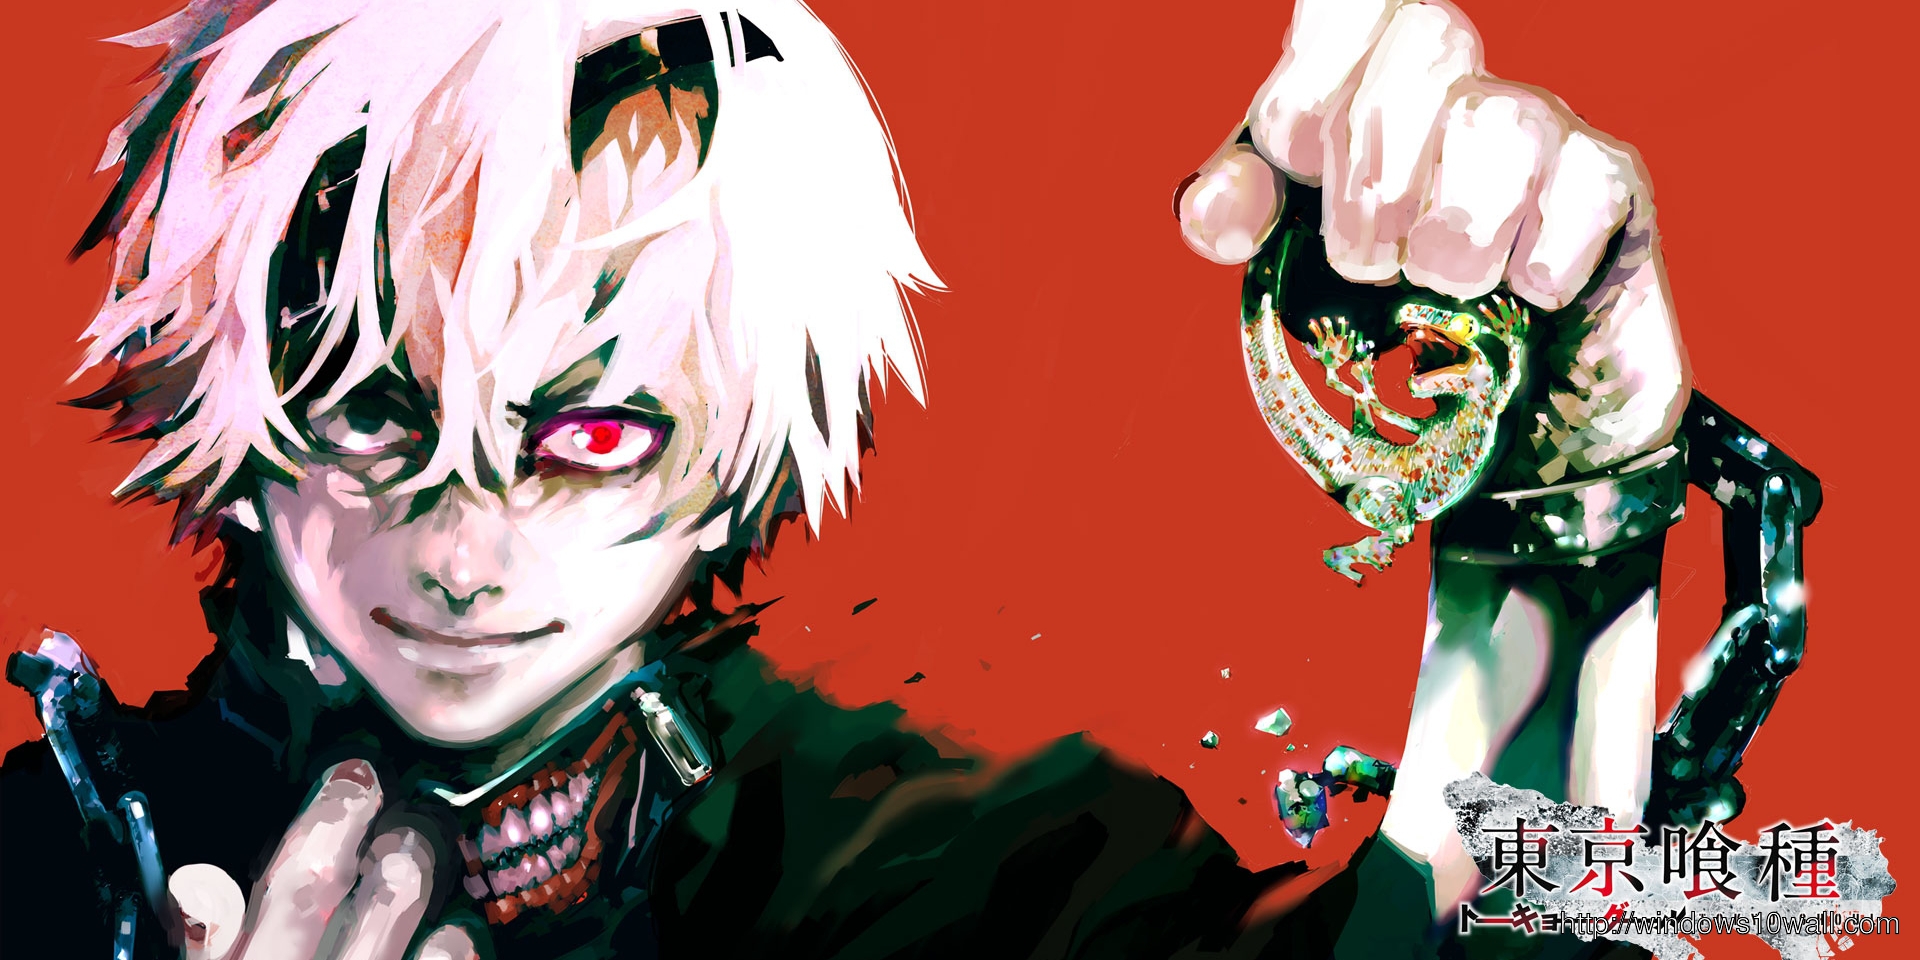 Tokyo Ghoul Background Wallpaper